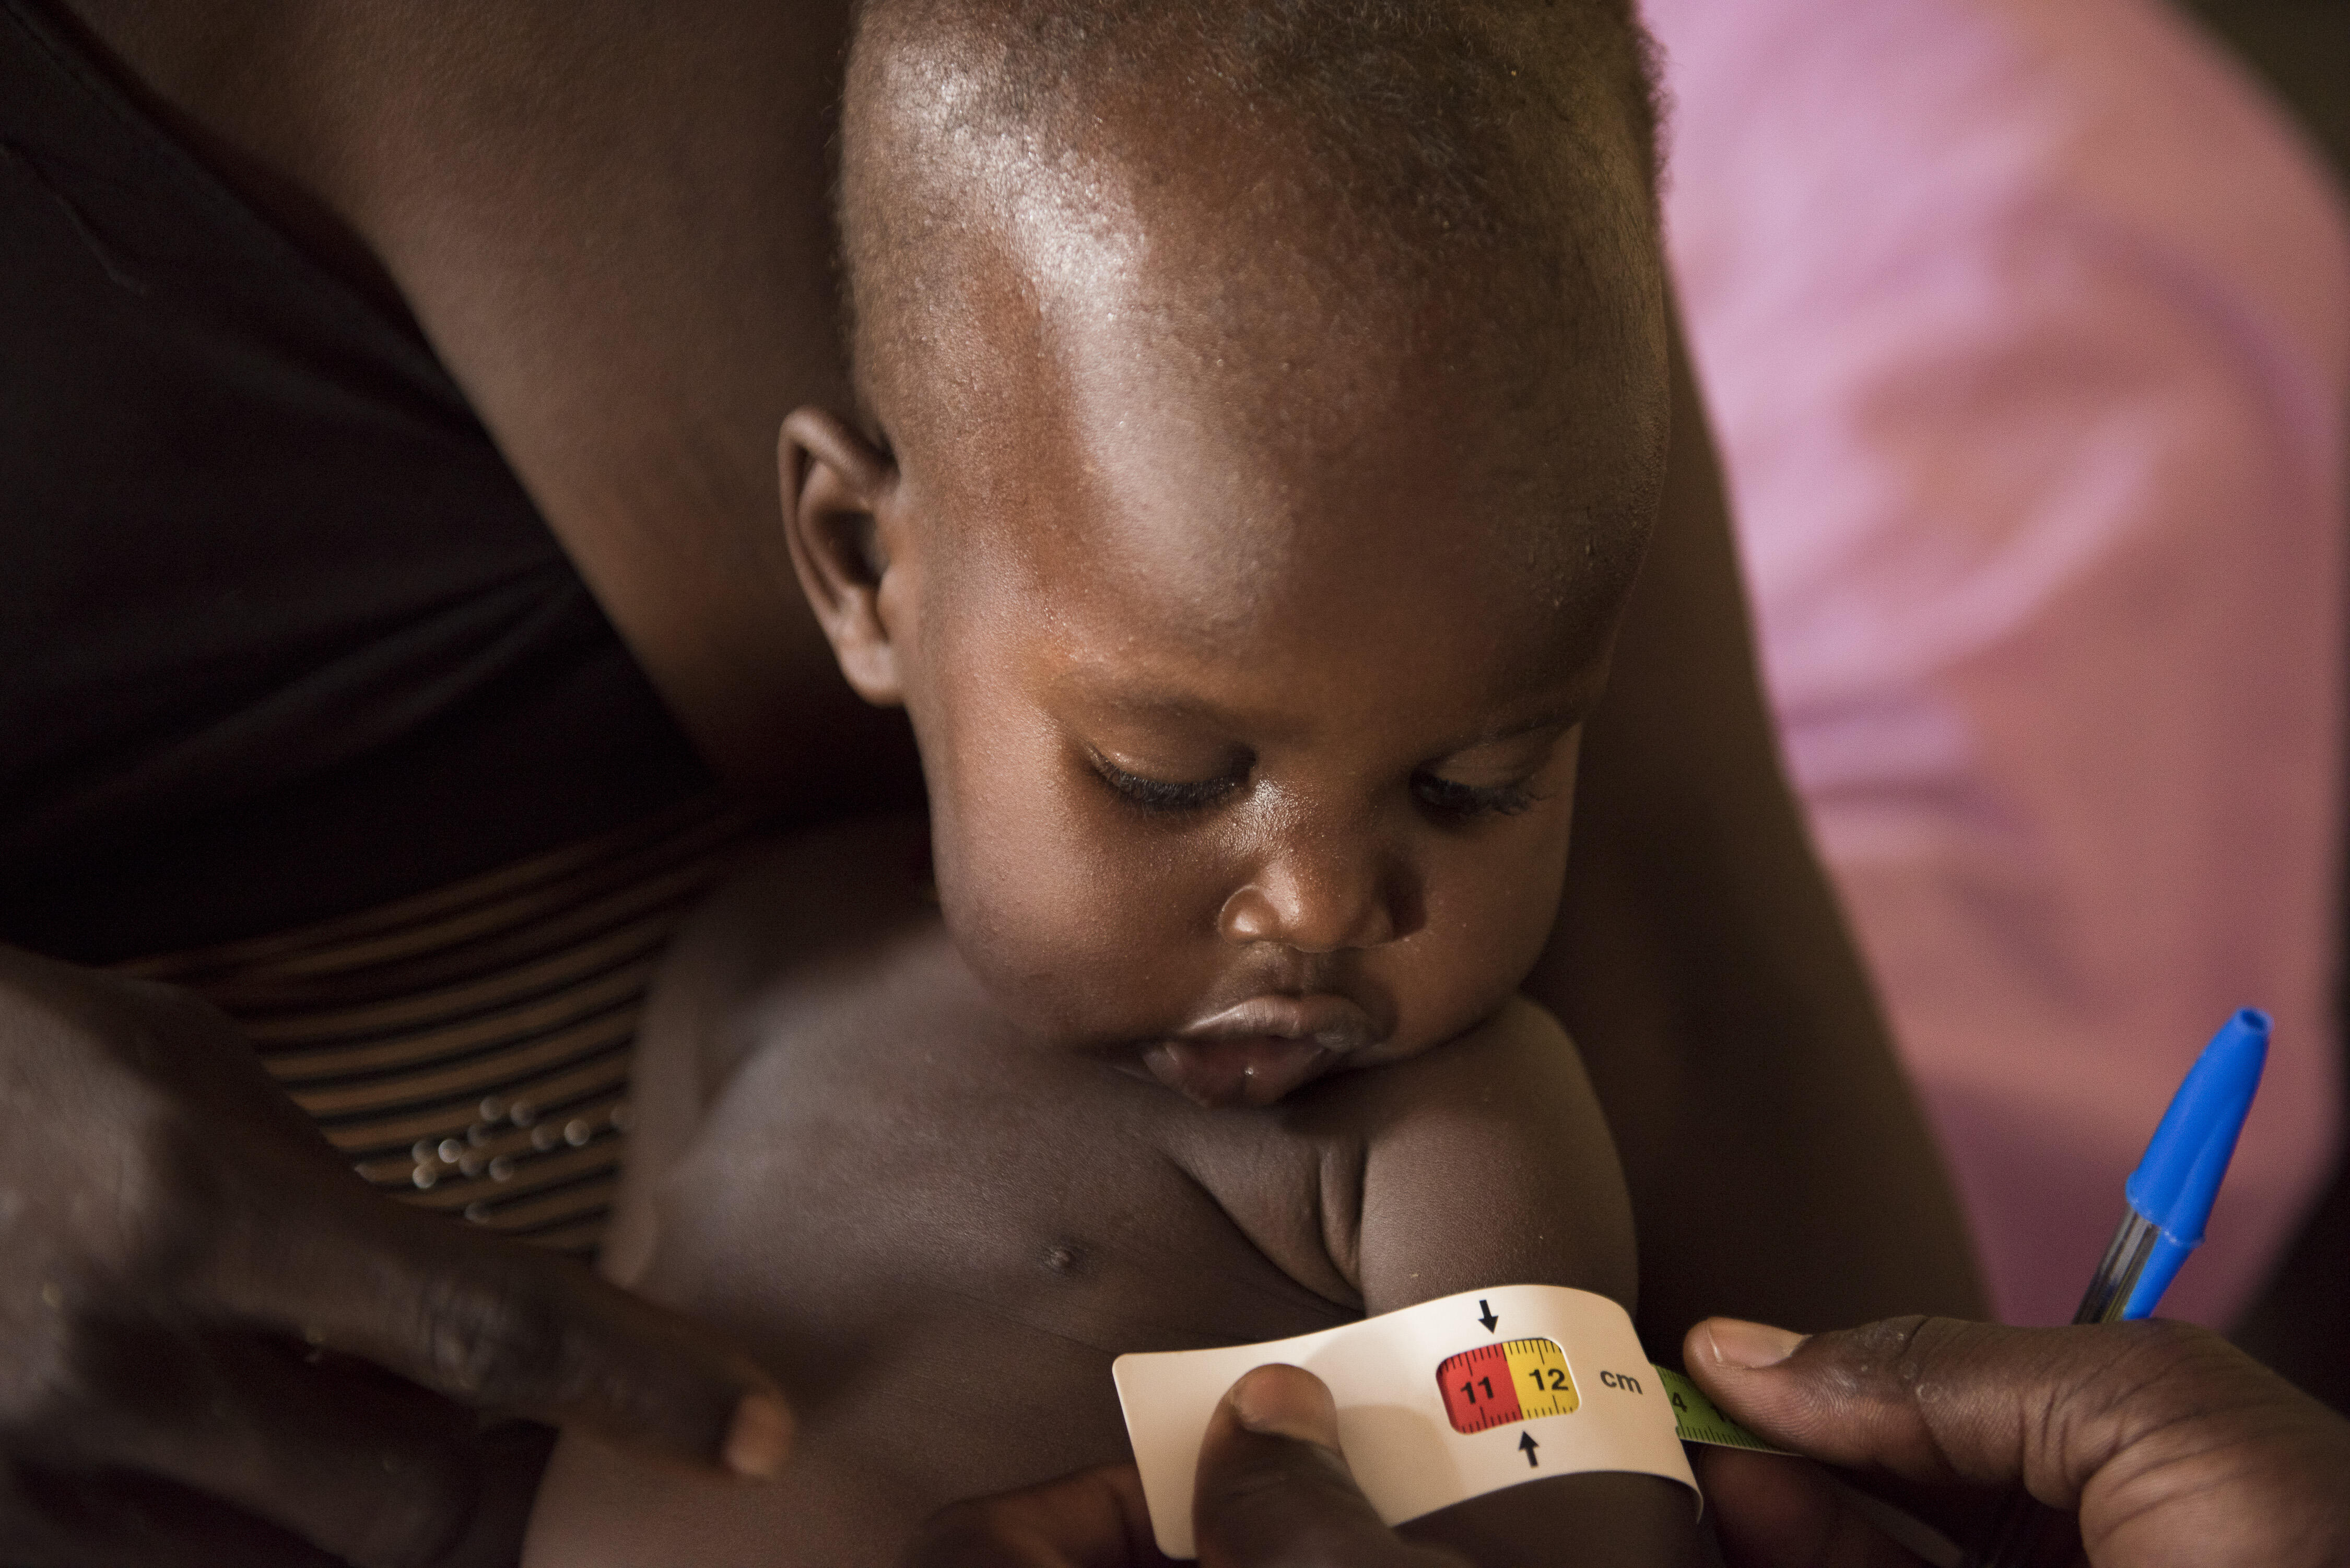 A health worker has placed a MUAC measuring tape around a South Sudanese baby's upper arm. The tape shows that he is at risk of acute malnutrition.